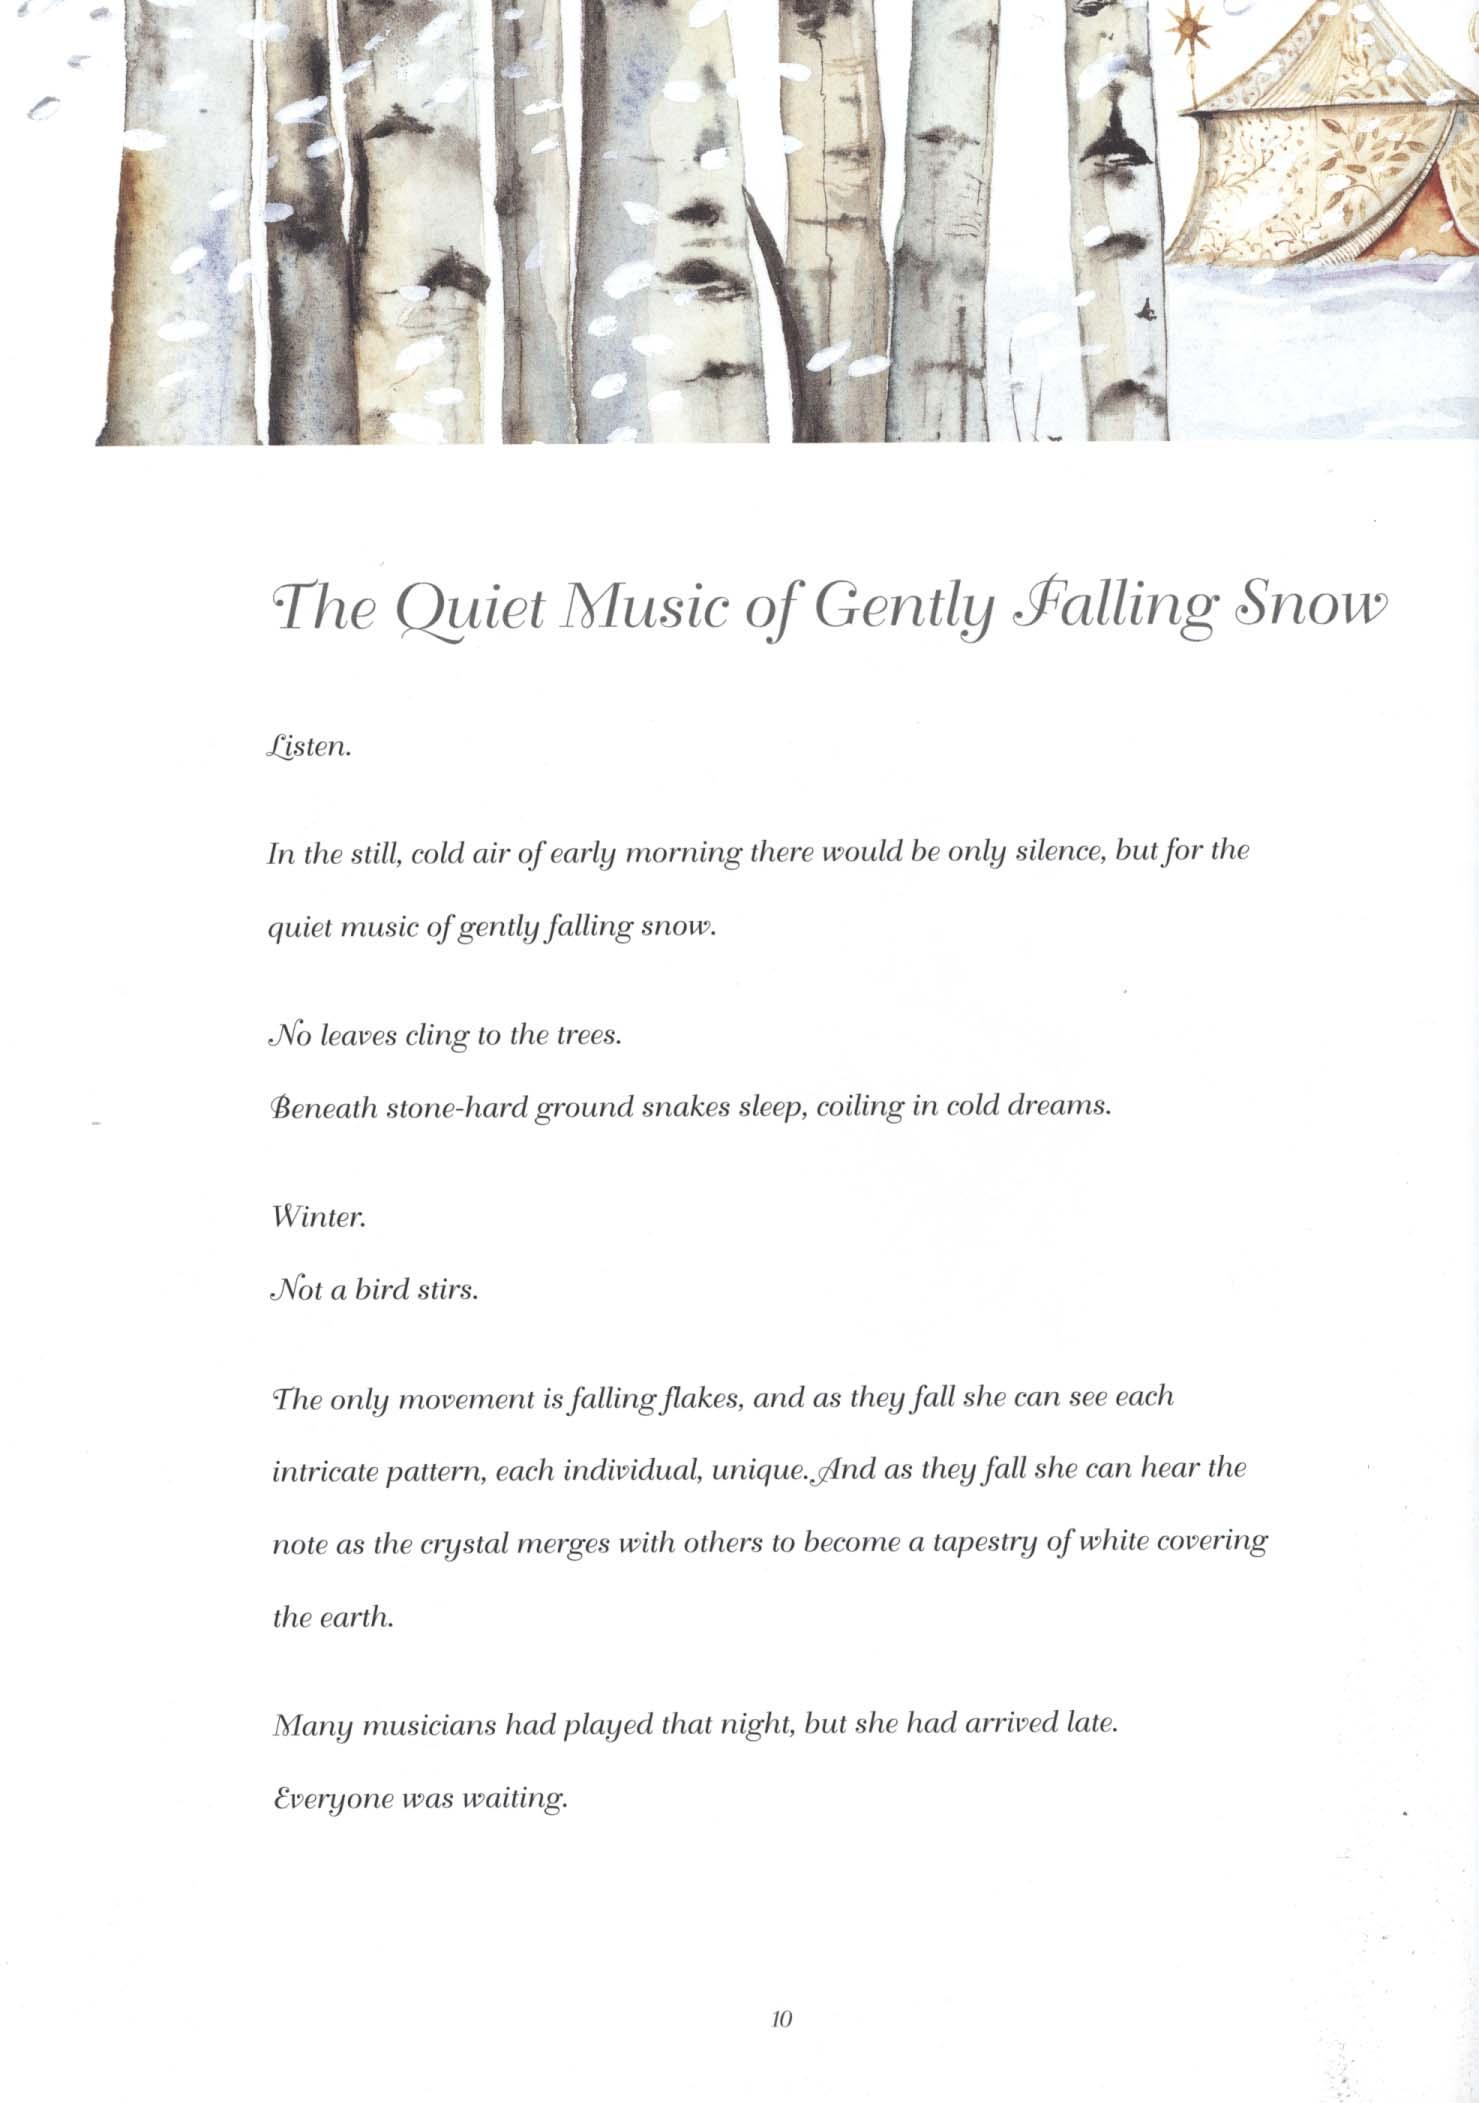 Quiet Music of Gently Falling Snow